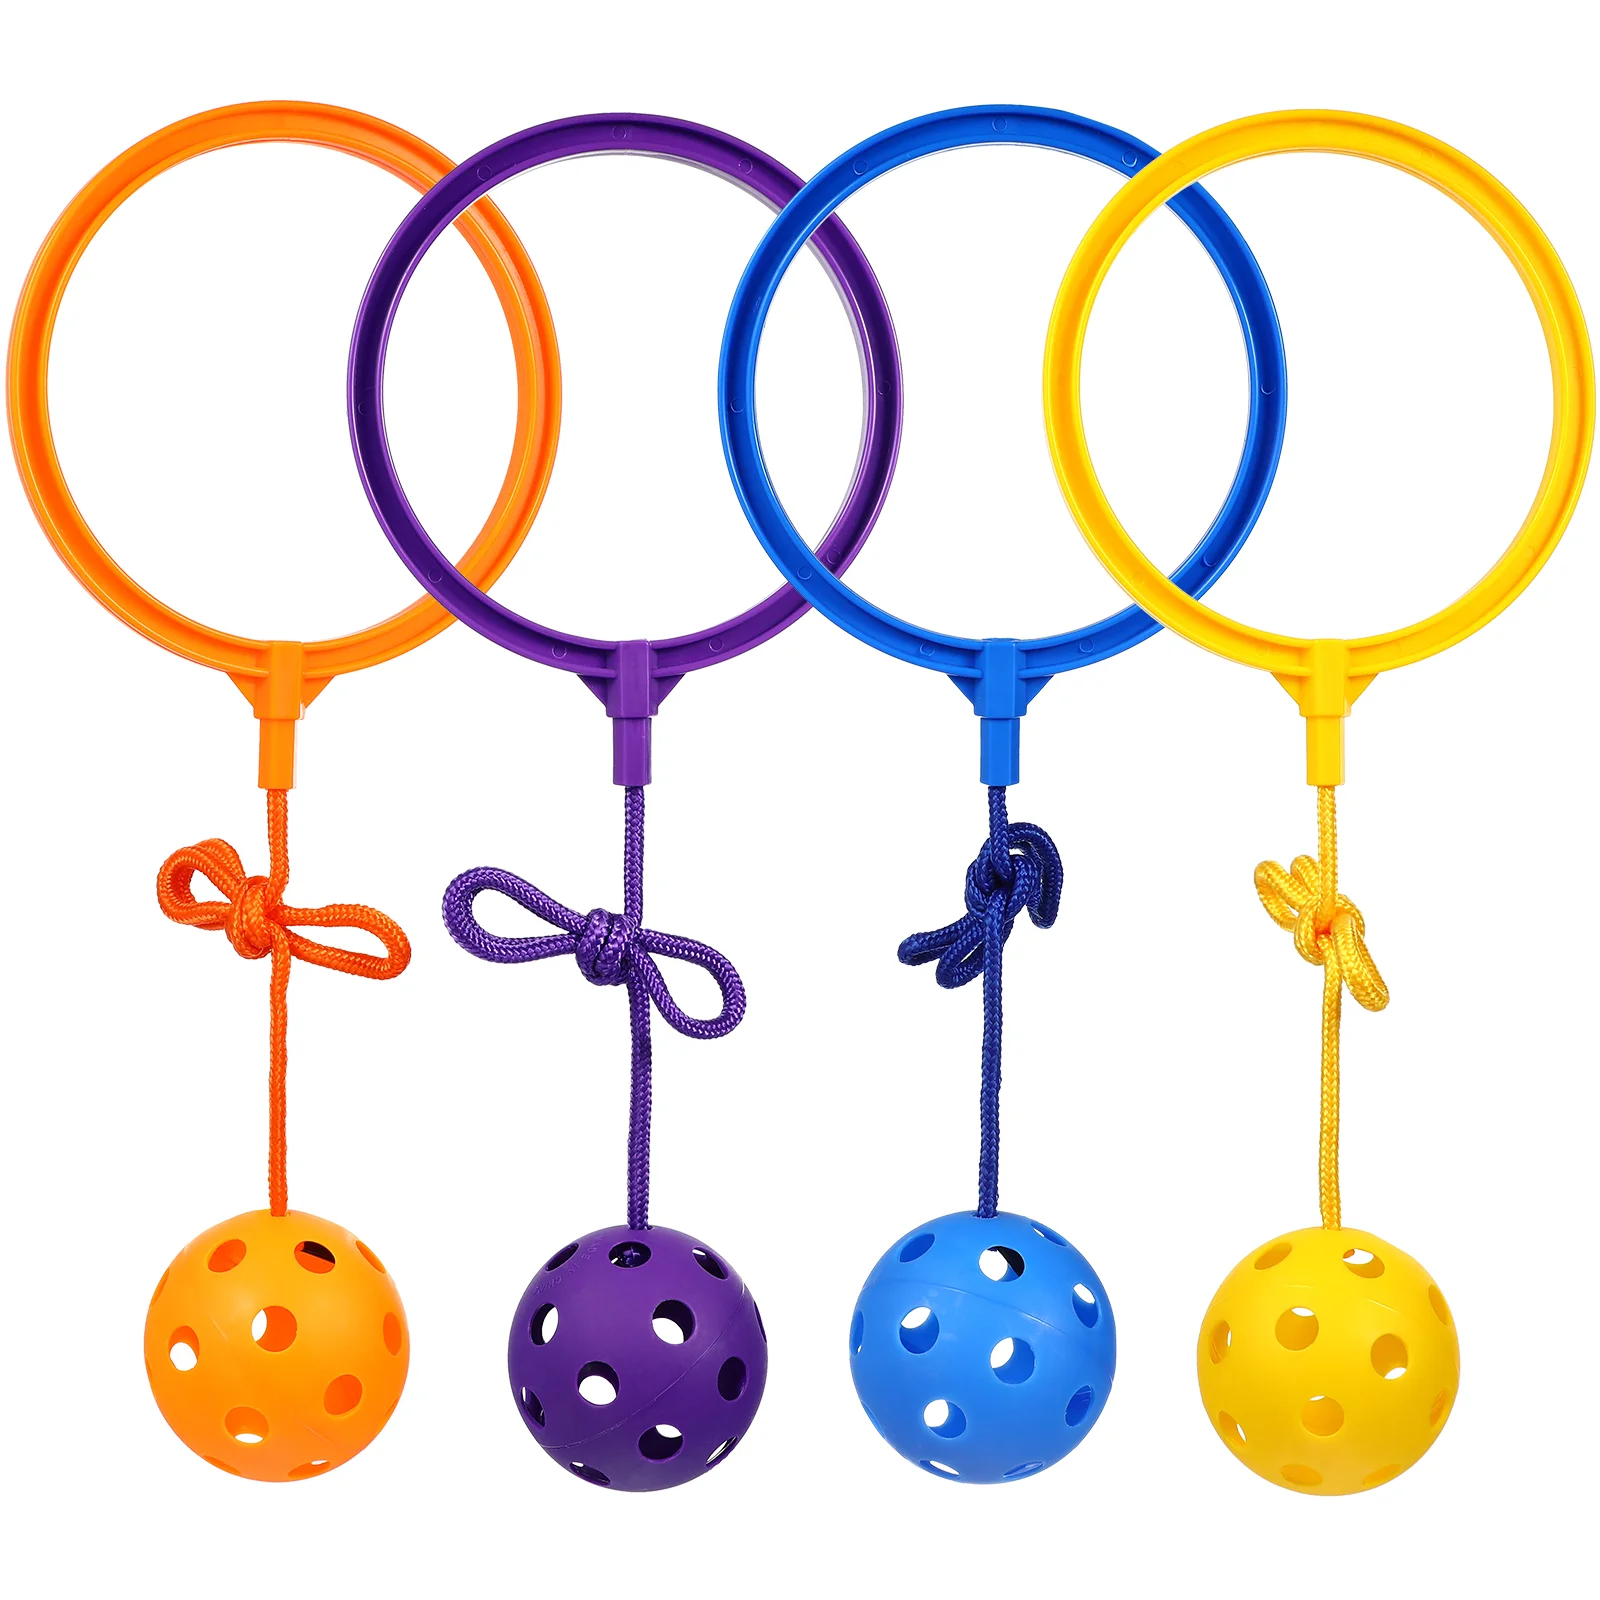 

4 Pcs Skip Ball Ankle Toys Jump Ankle Ropes Skip Jump Toys Sports Balls for Toddlers Kids